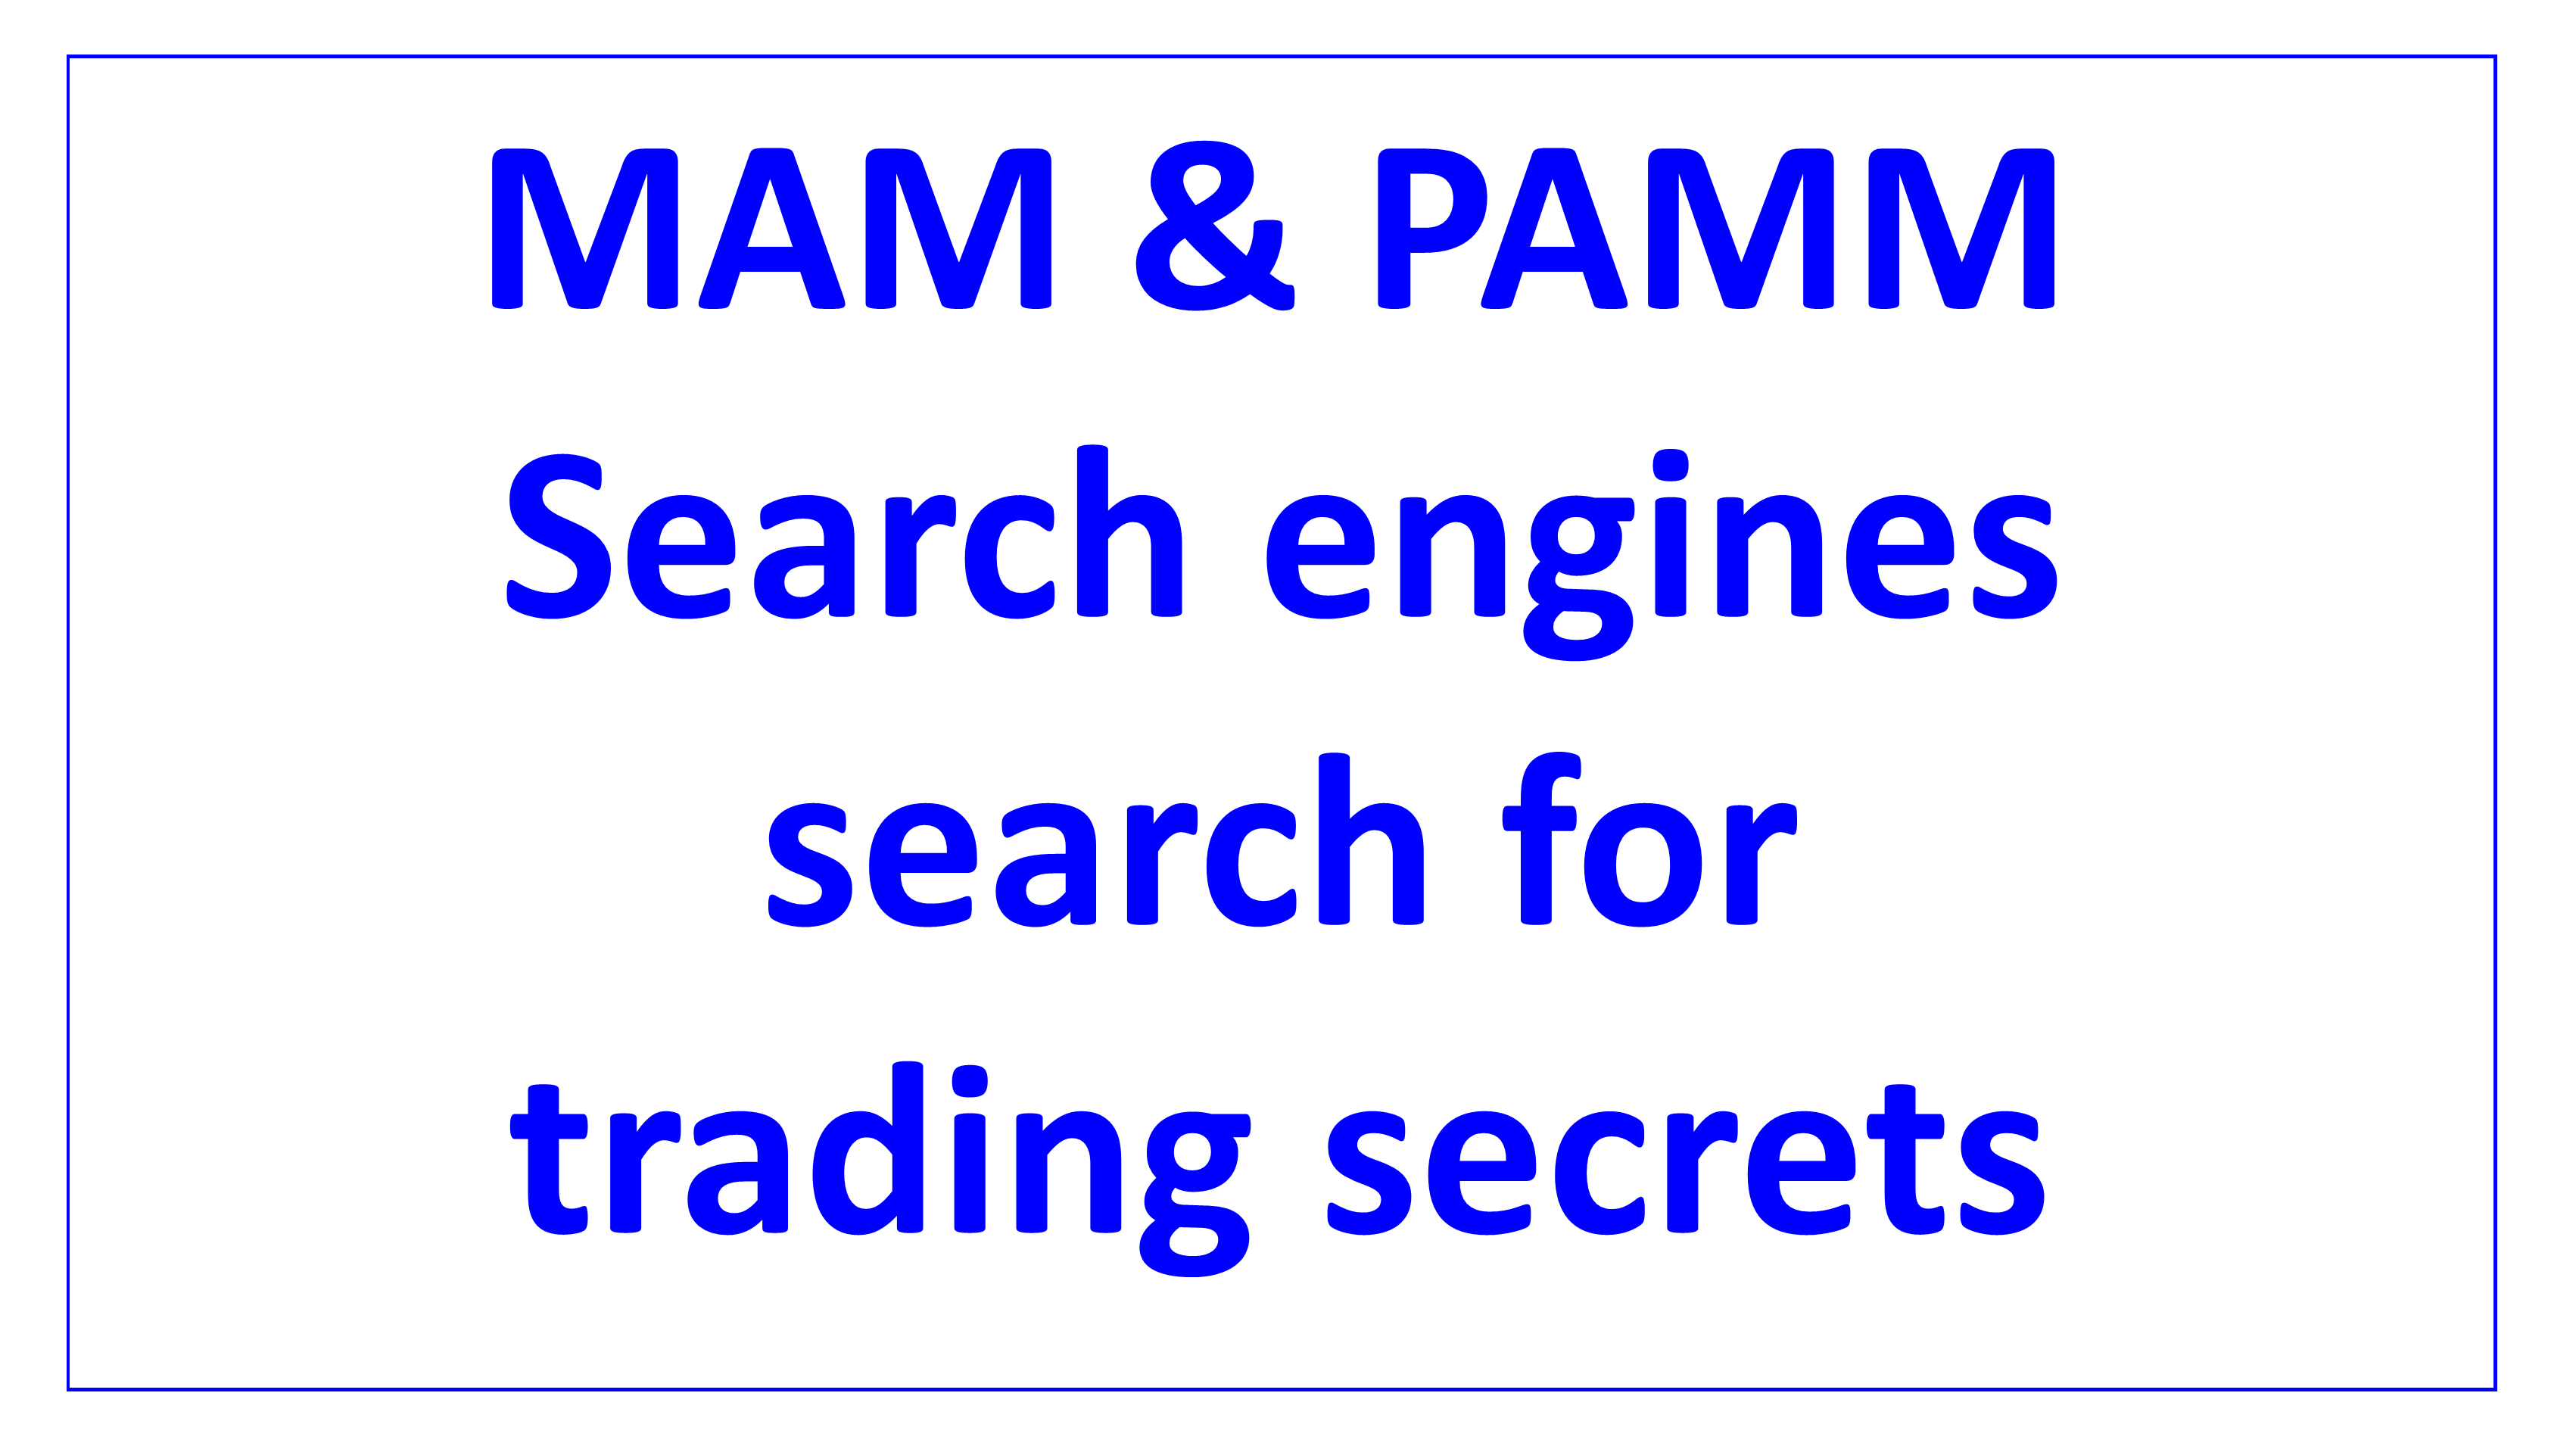 search engines search for trading secrets en